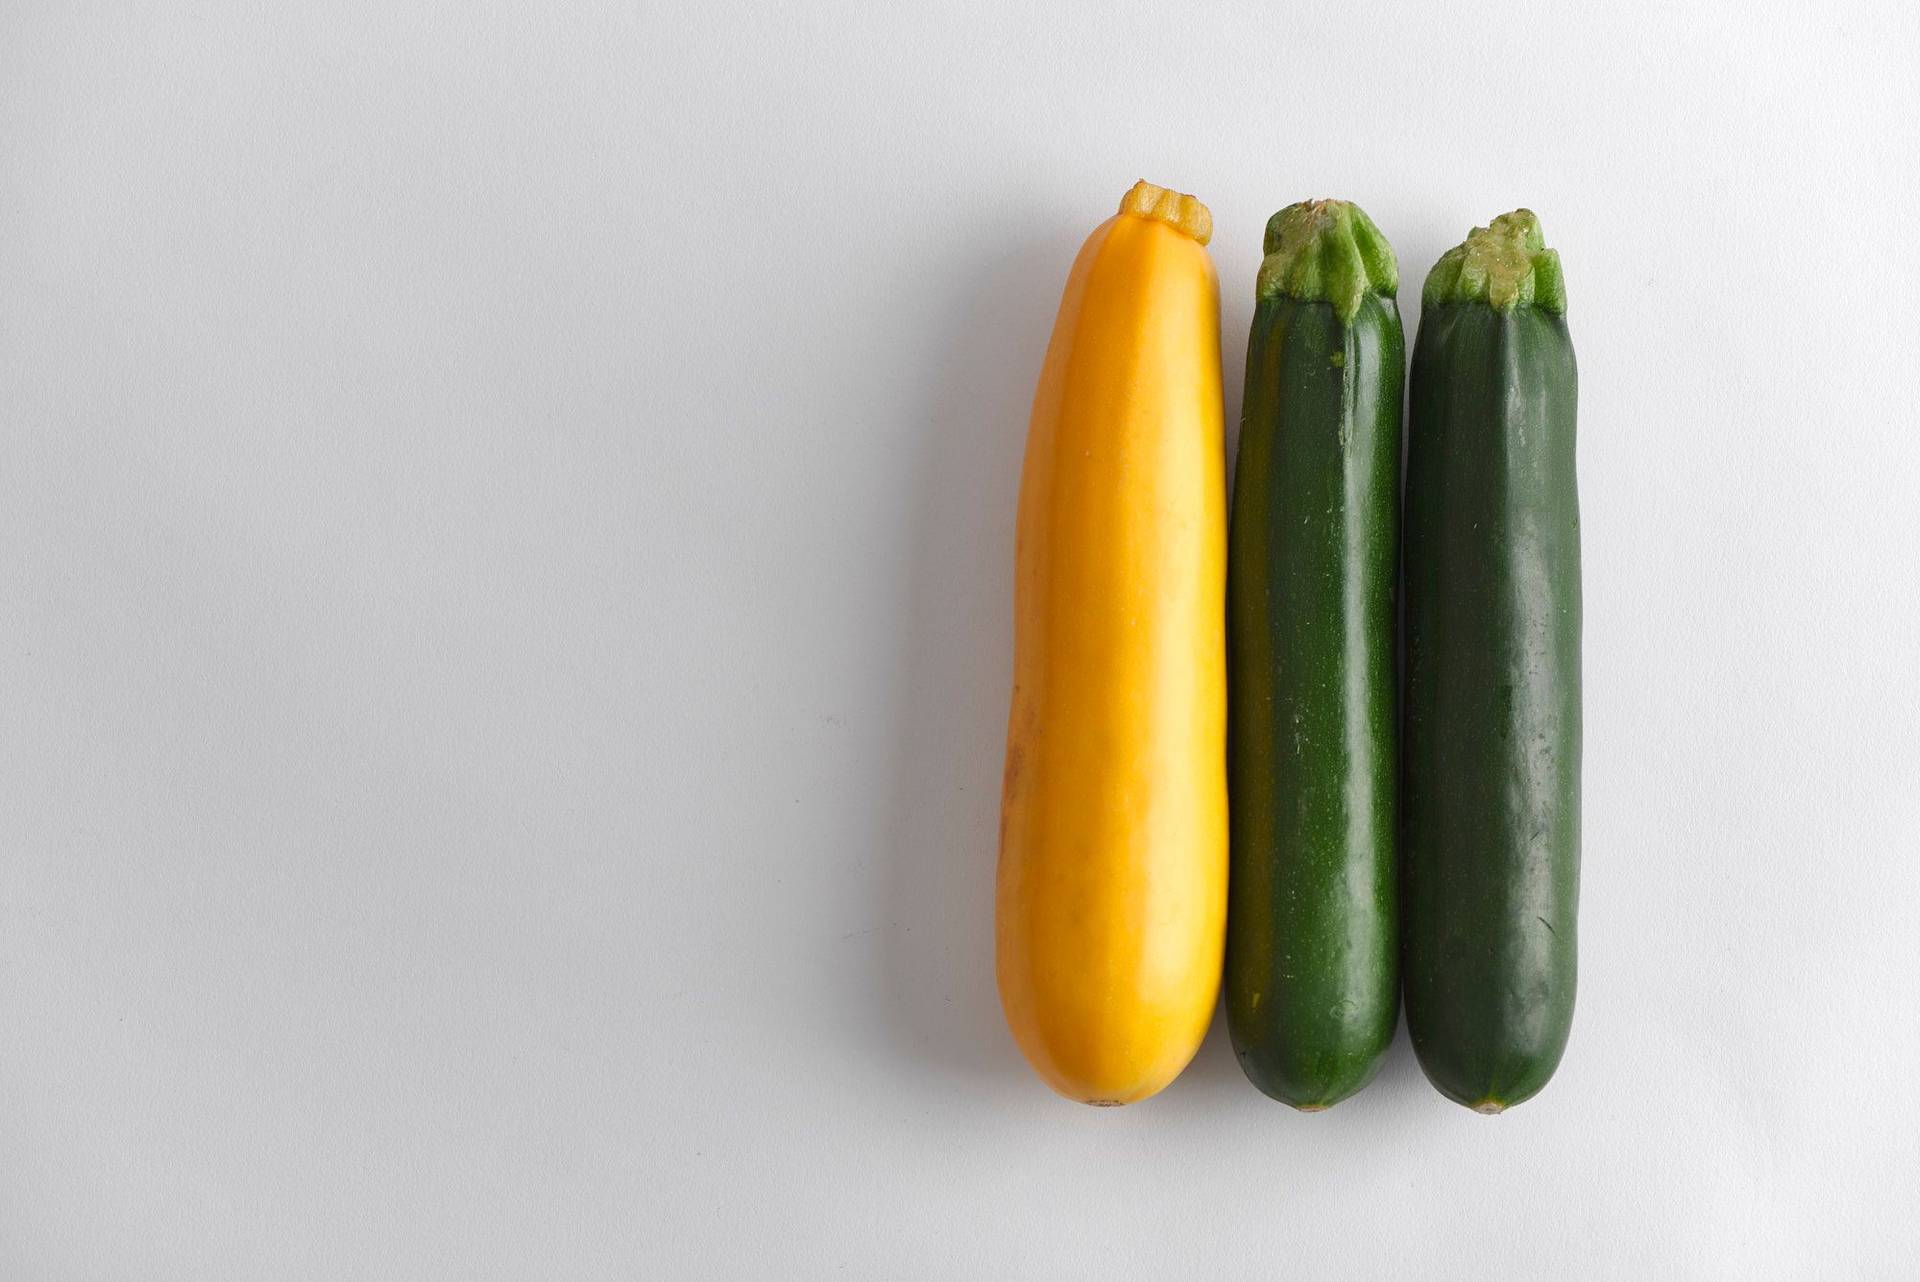 one yellow and two green courgettes on a gray plate with white background